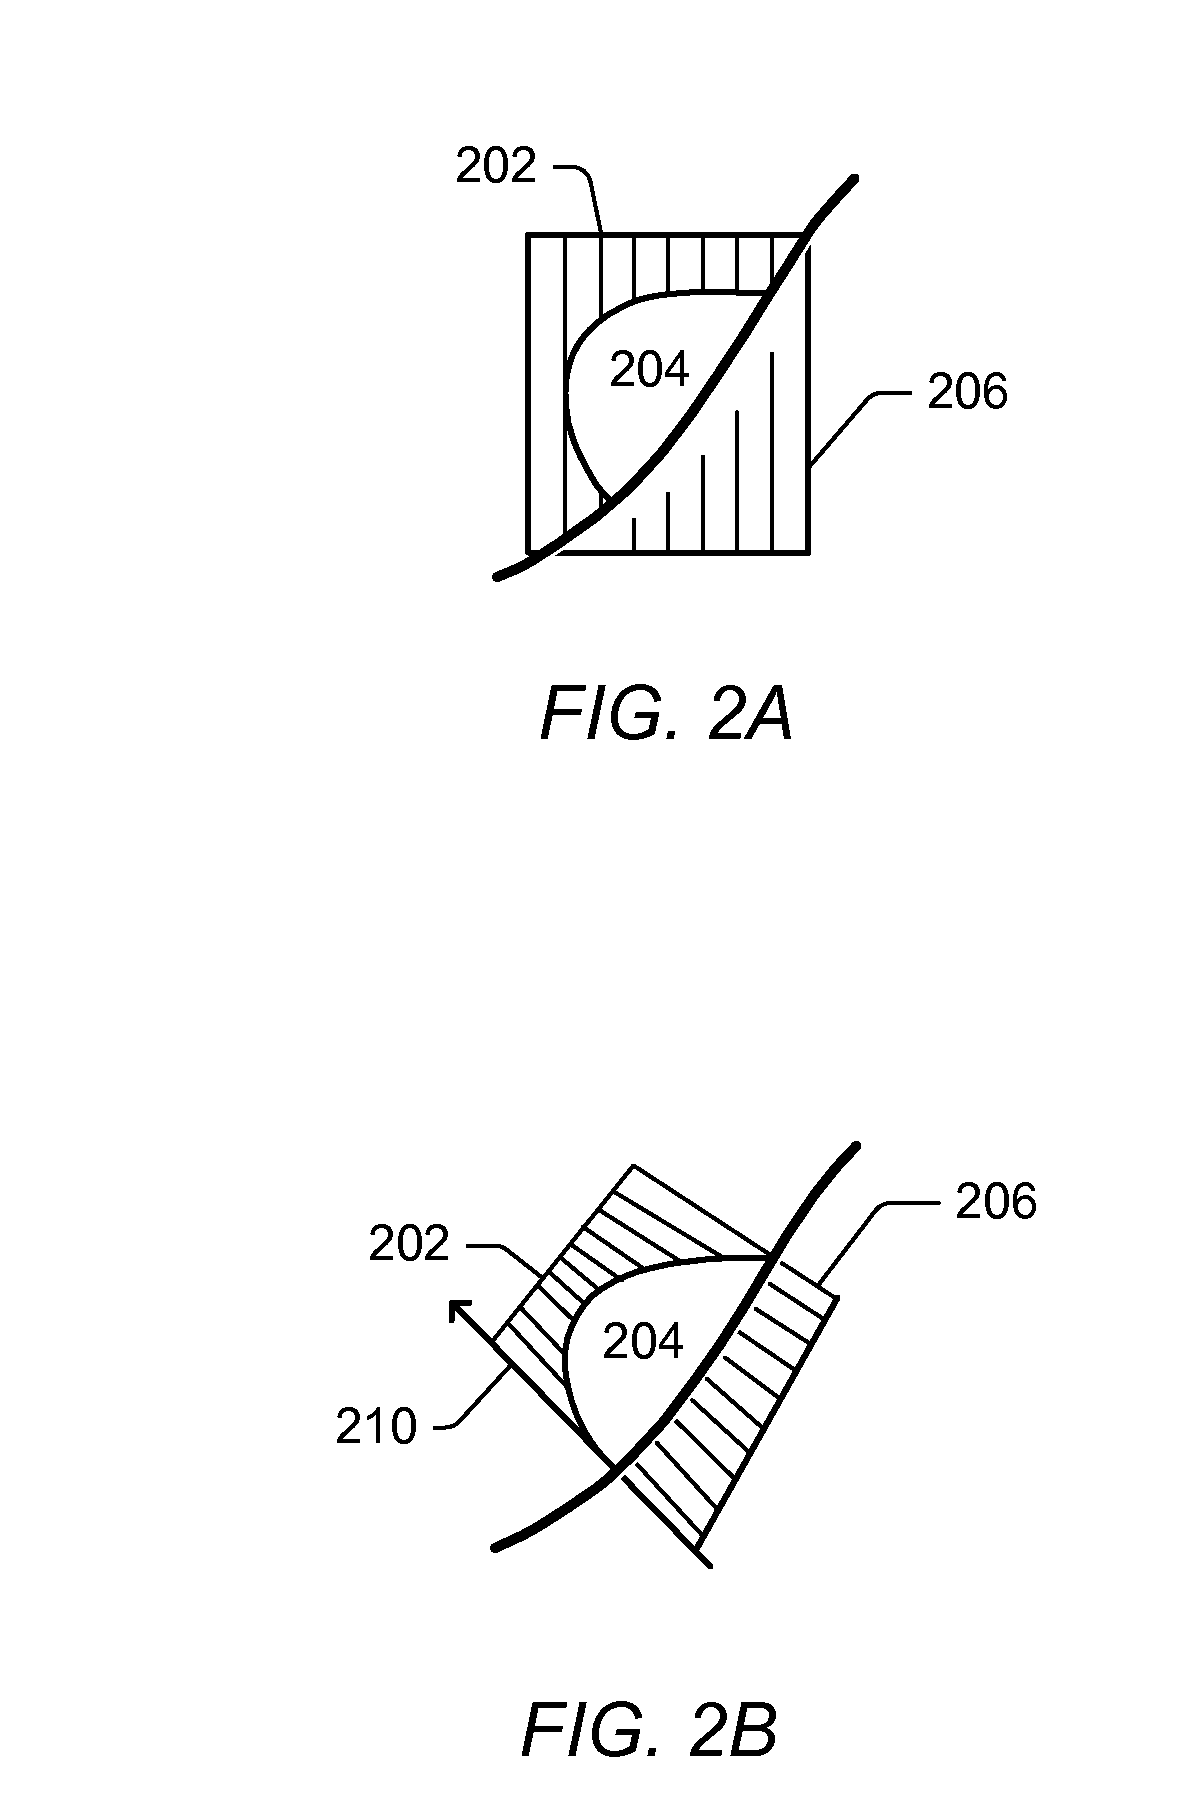 System and Method for Simulating Shallow Water Effects on Arbitrary Surfaces